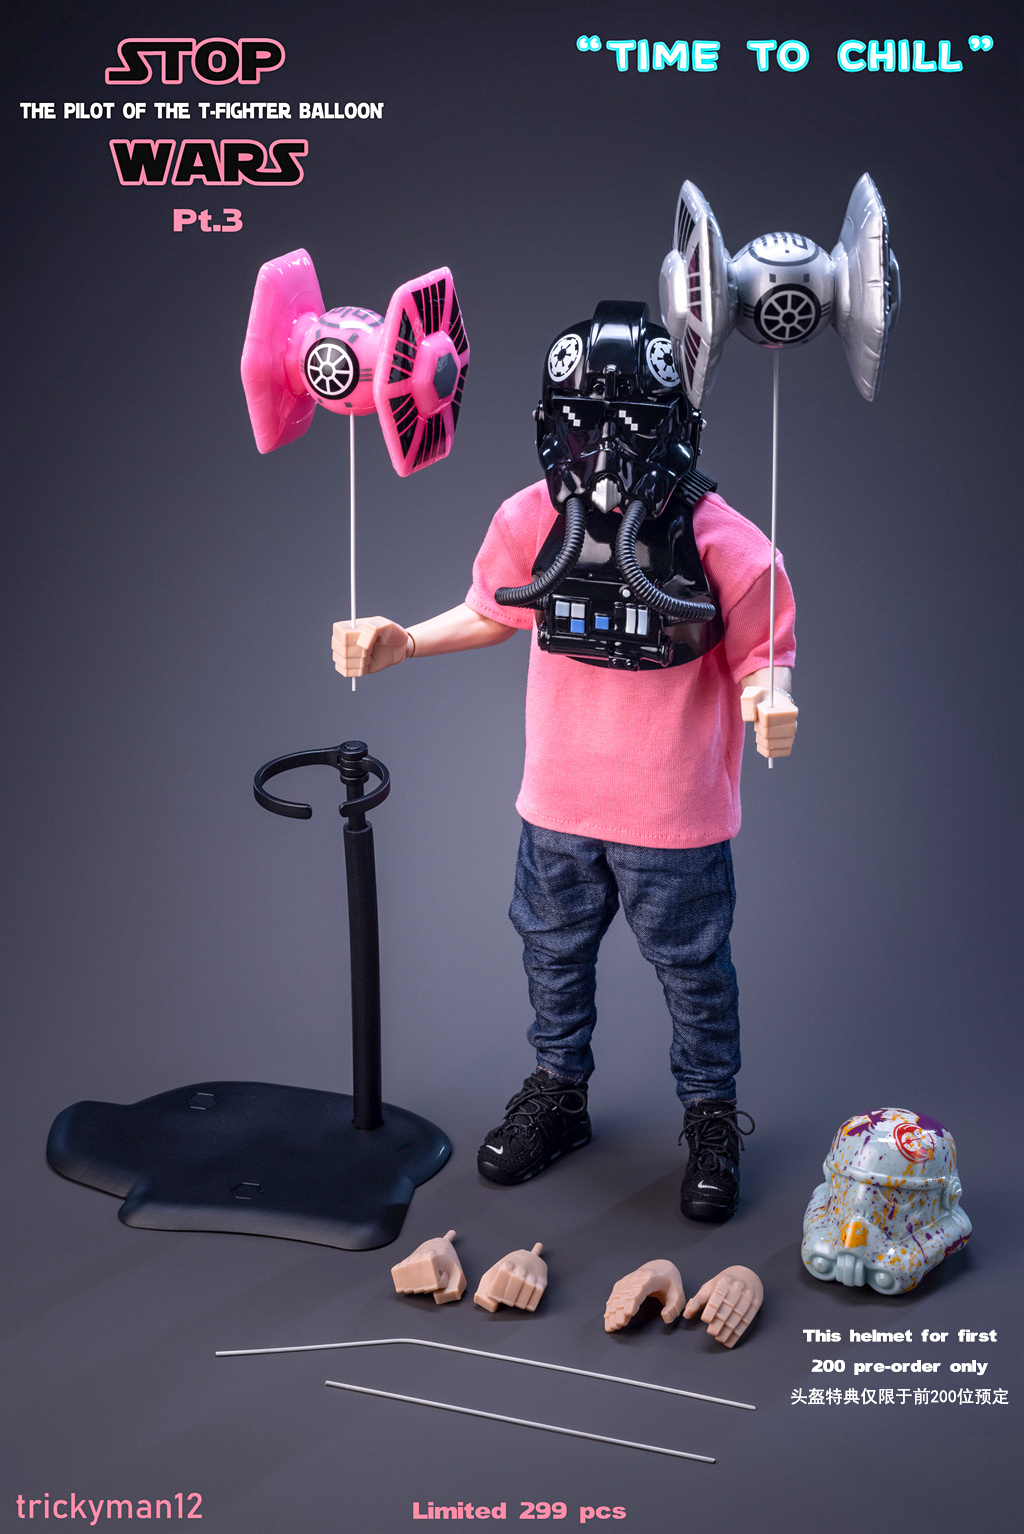 stylized - NEW PRODUCT: STOPWARS Pt.3: 1/6 scale THE PILOT OF THE T-FIGHTER BALLOON 16580816